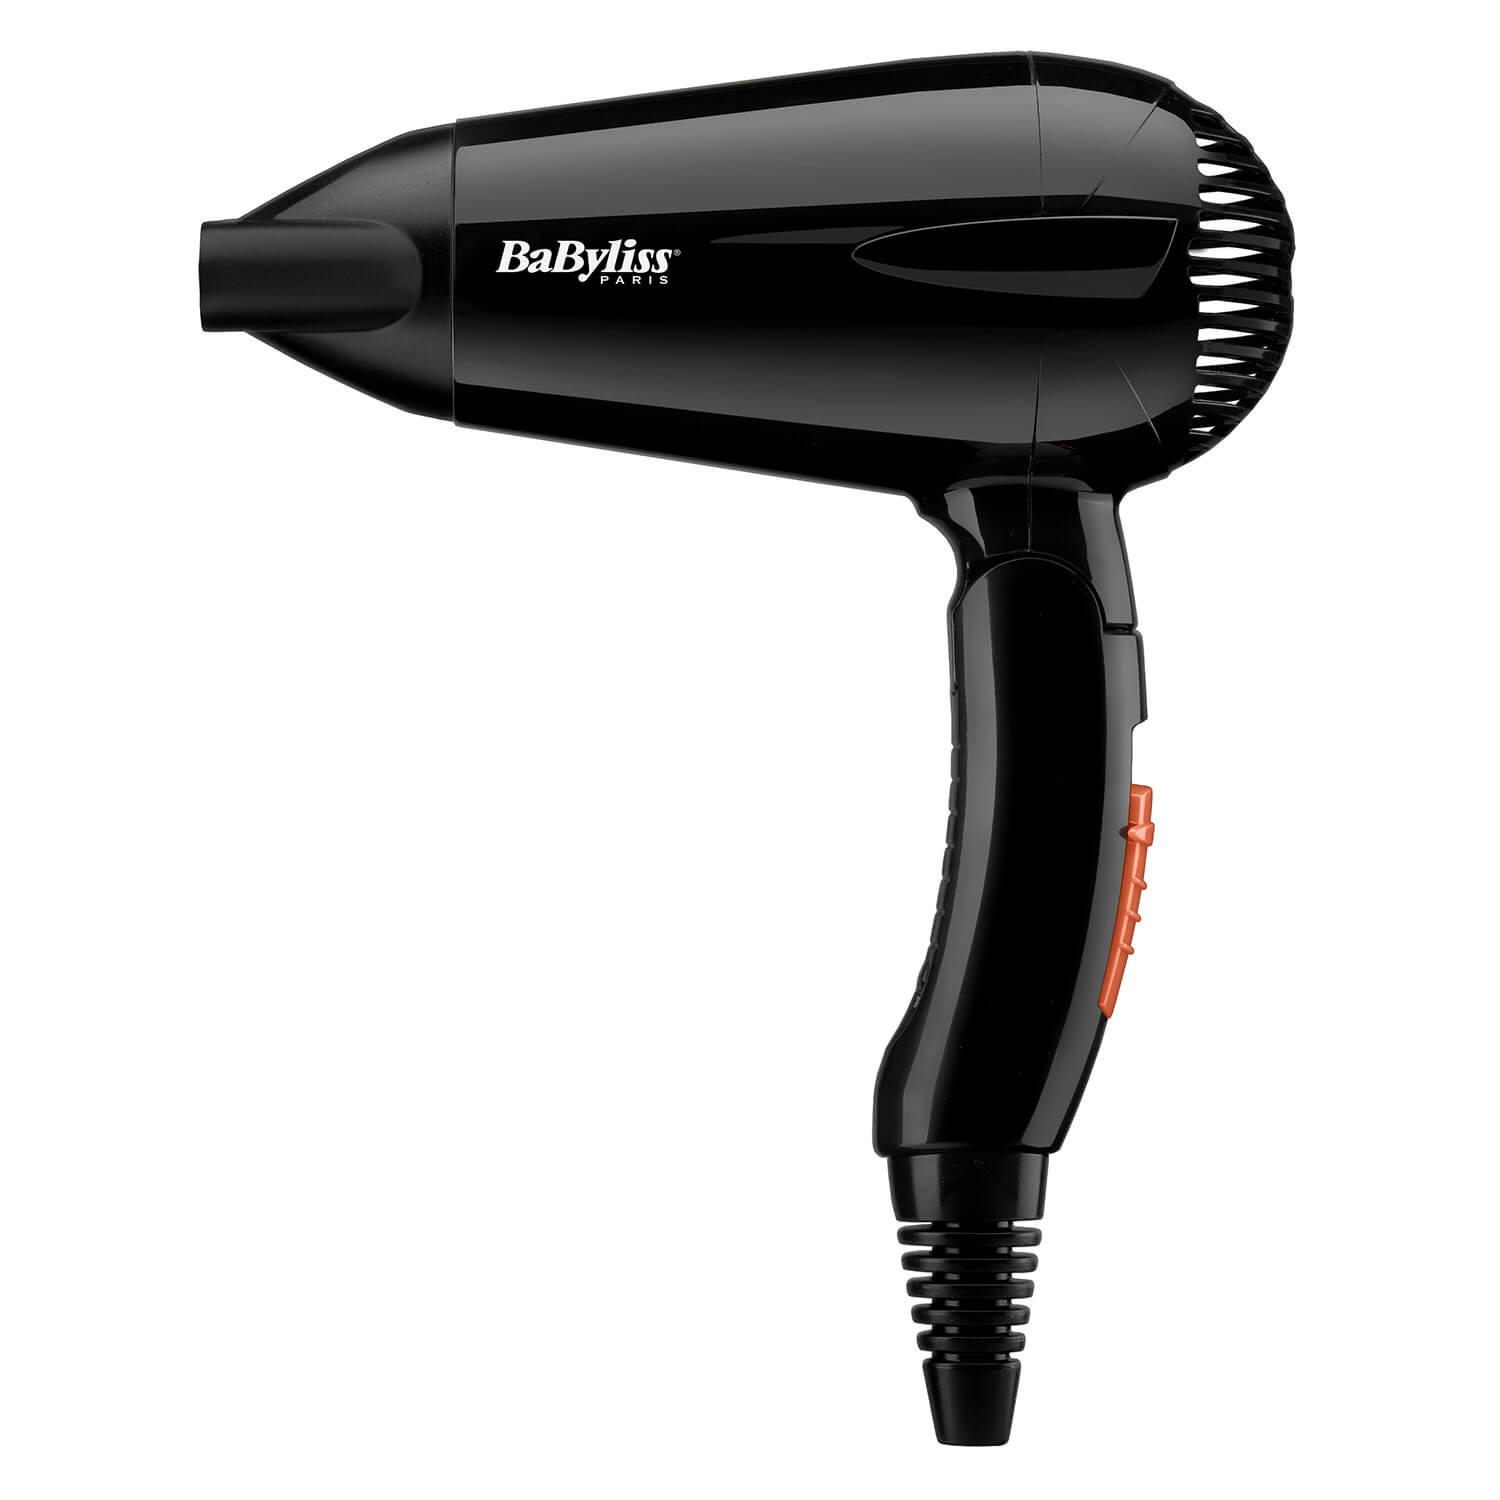 BaByliss - Hairdryer Travel Dry 2000W 5344CHE